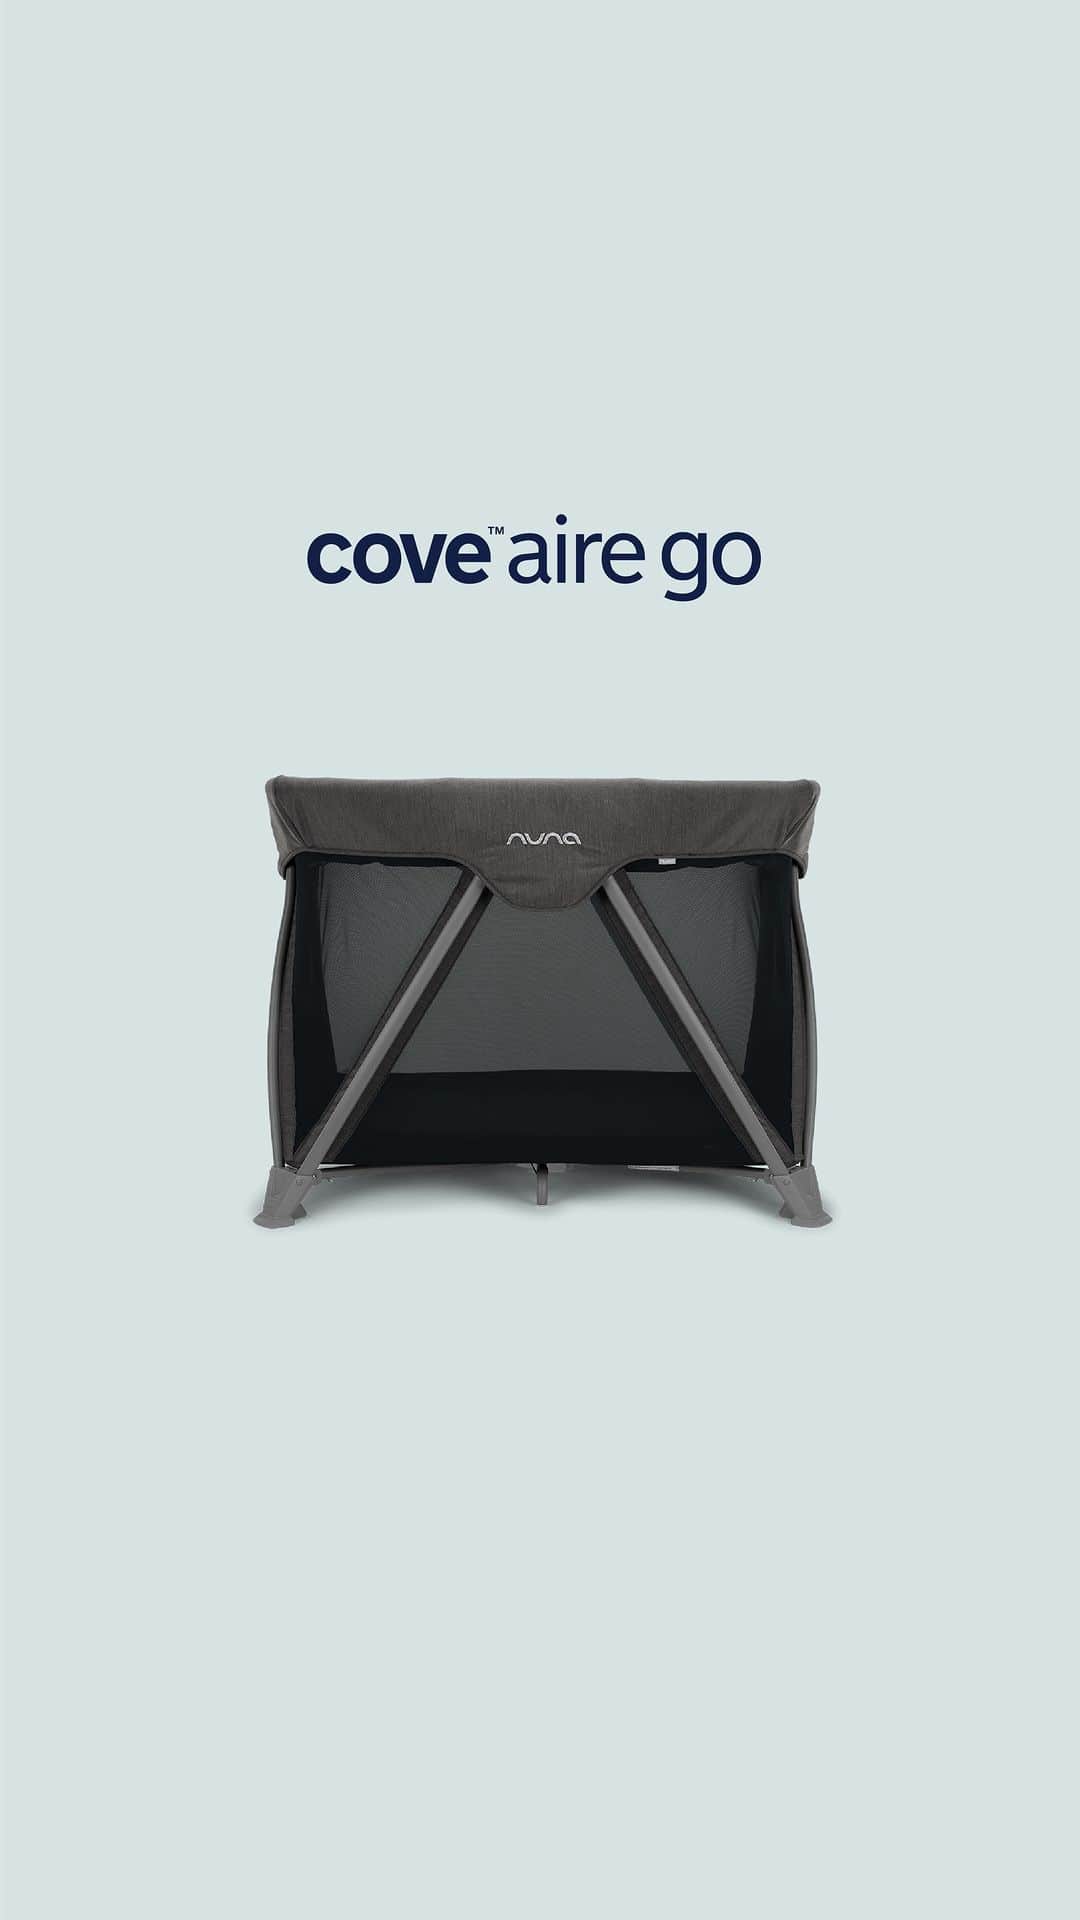 nunaのインスタグラム：「It’s a bassinet! It’s a playard! It’s both! The COVE aire go fits into your family wherever you need it to 🤗 Plus, the GREENGUARD Gold certified materials make sure your air stays chemical-free for baby.  #nuna #mynuna」